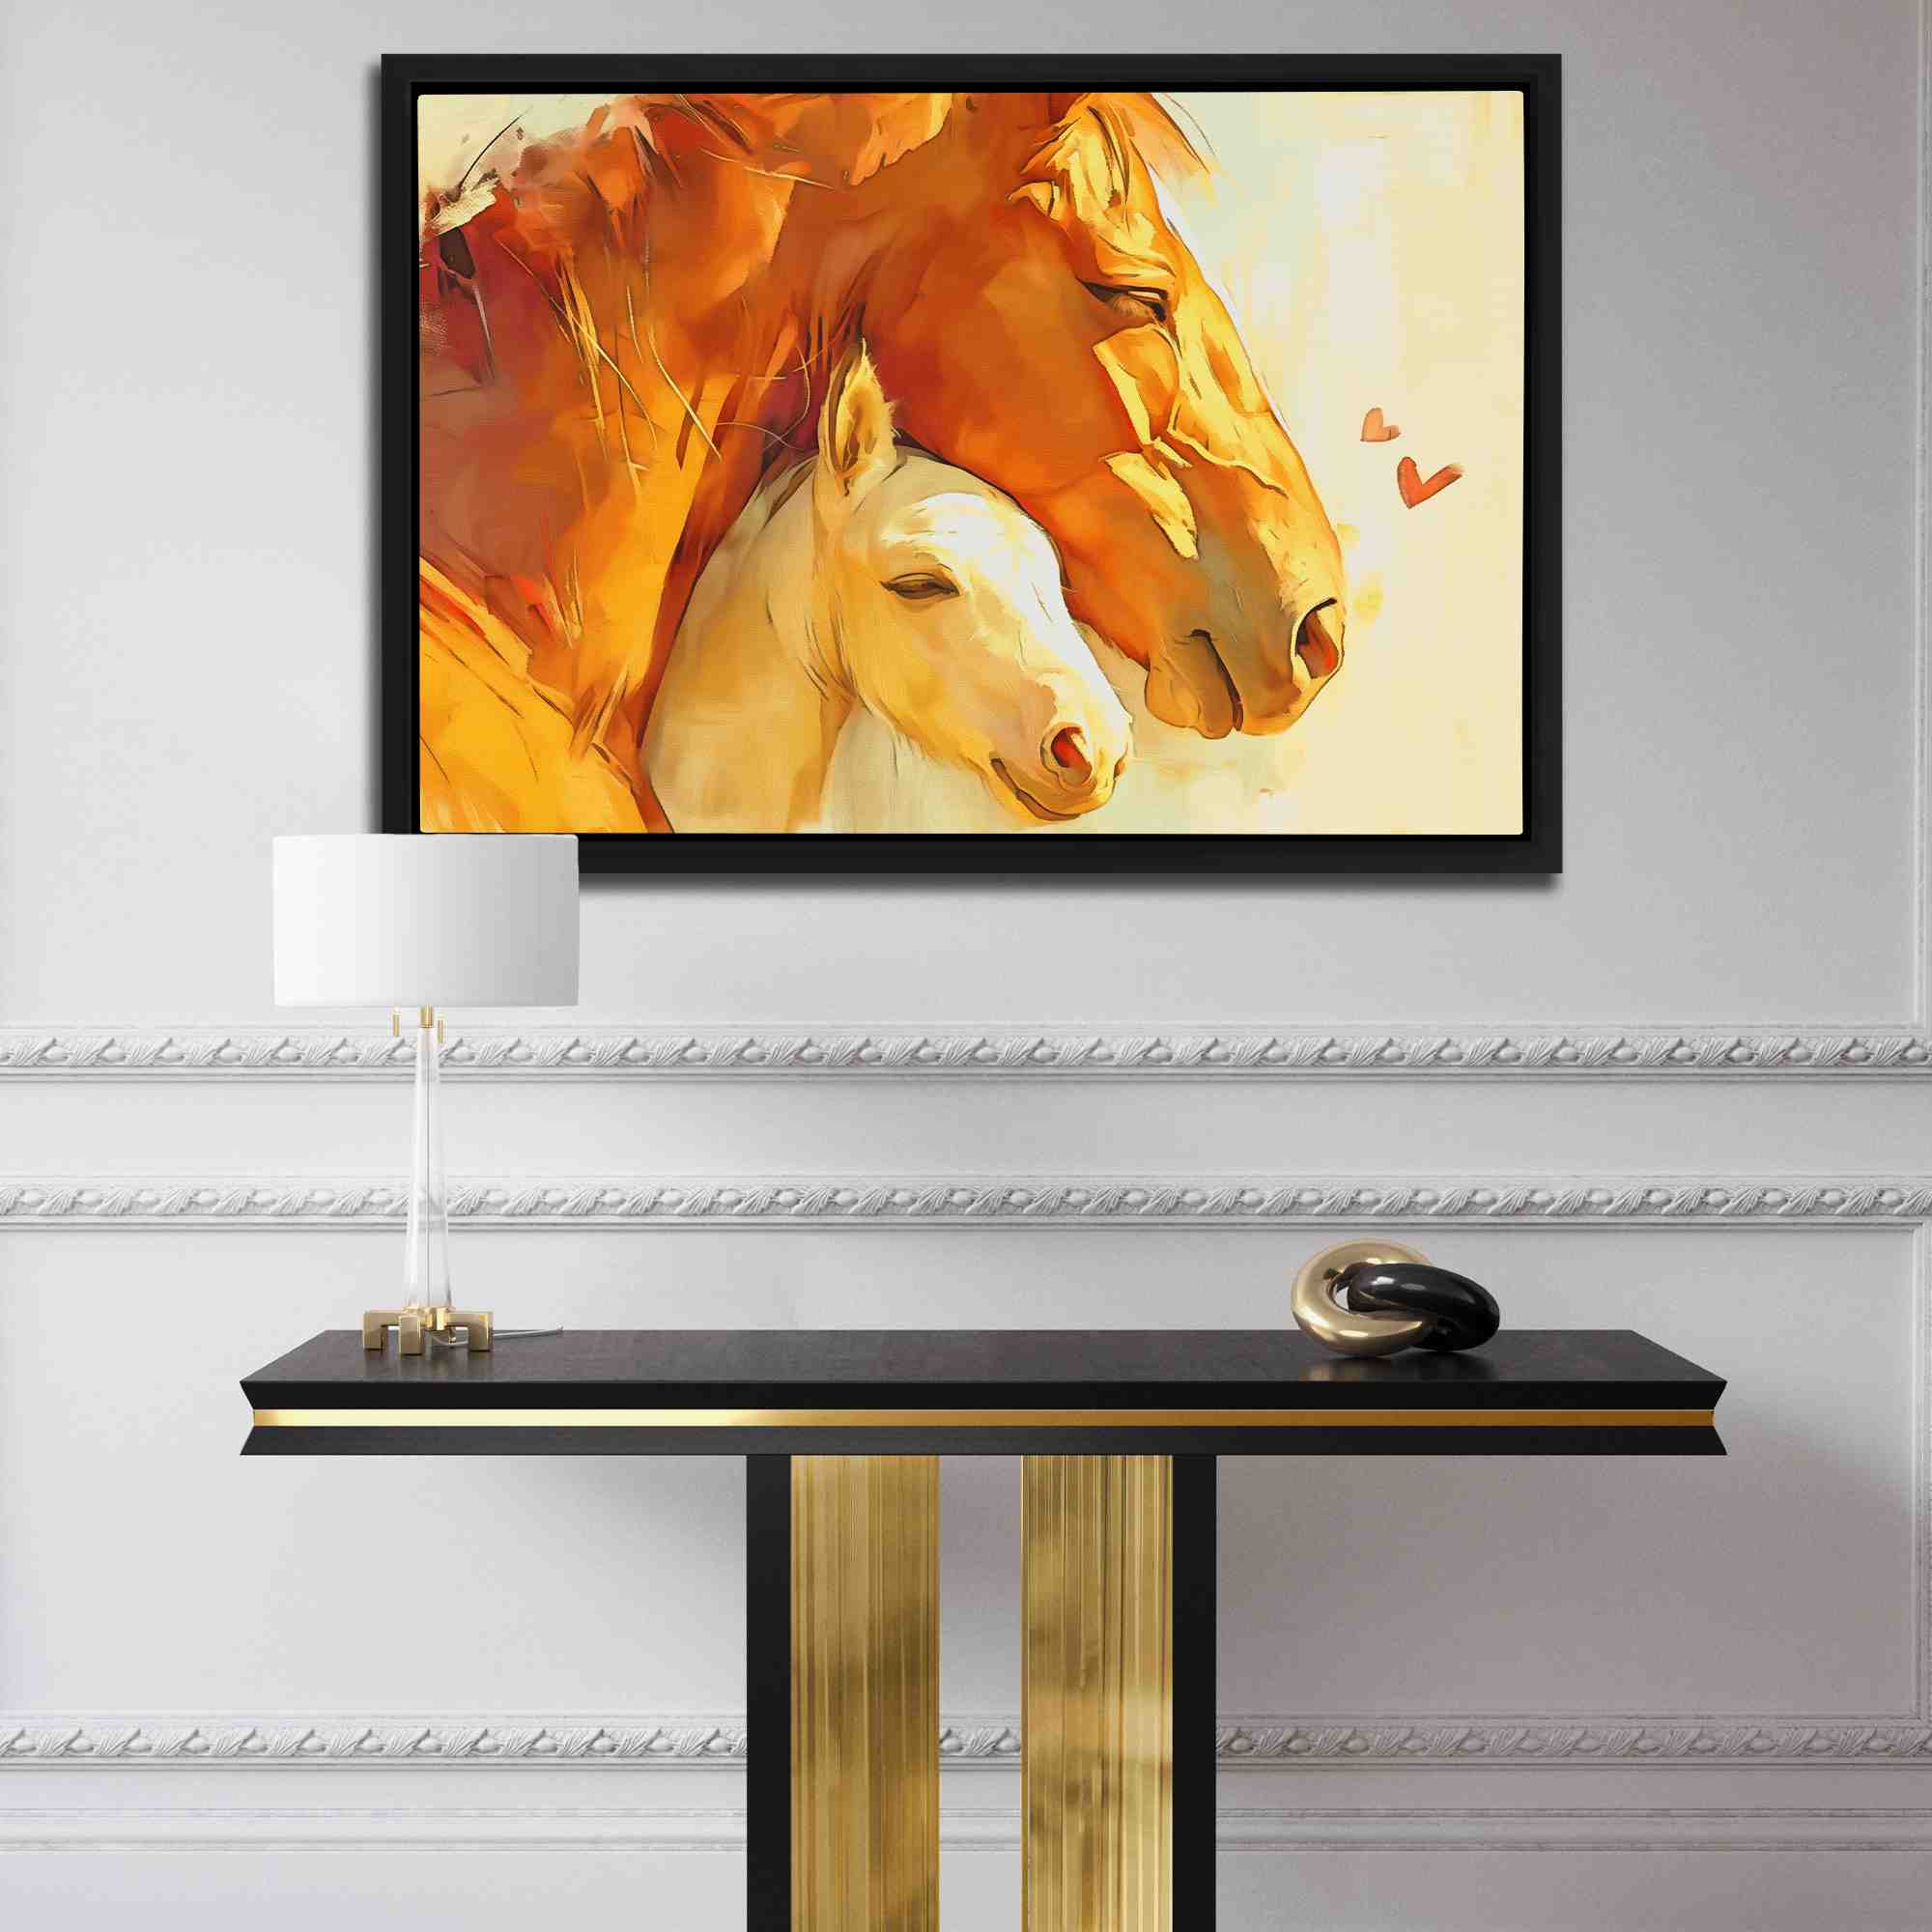 a painting of two horses on a wall